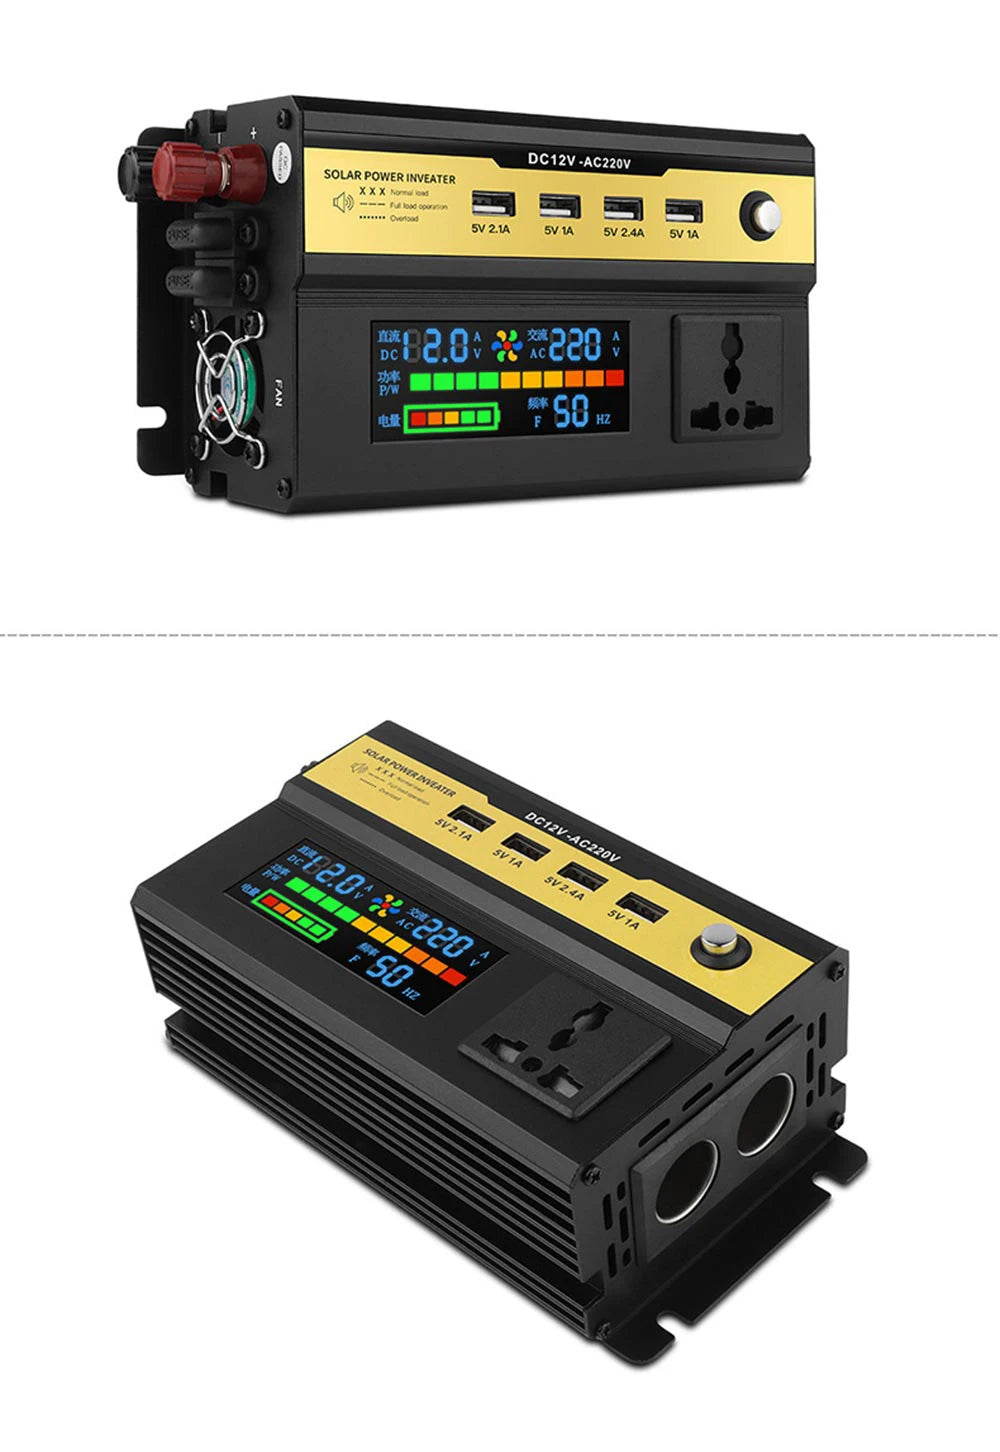 Portable DC to AC inverter with modified sine wave output and specifications for power conversion.